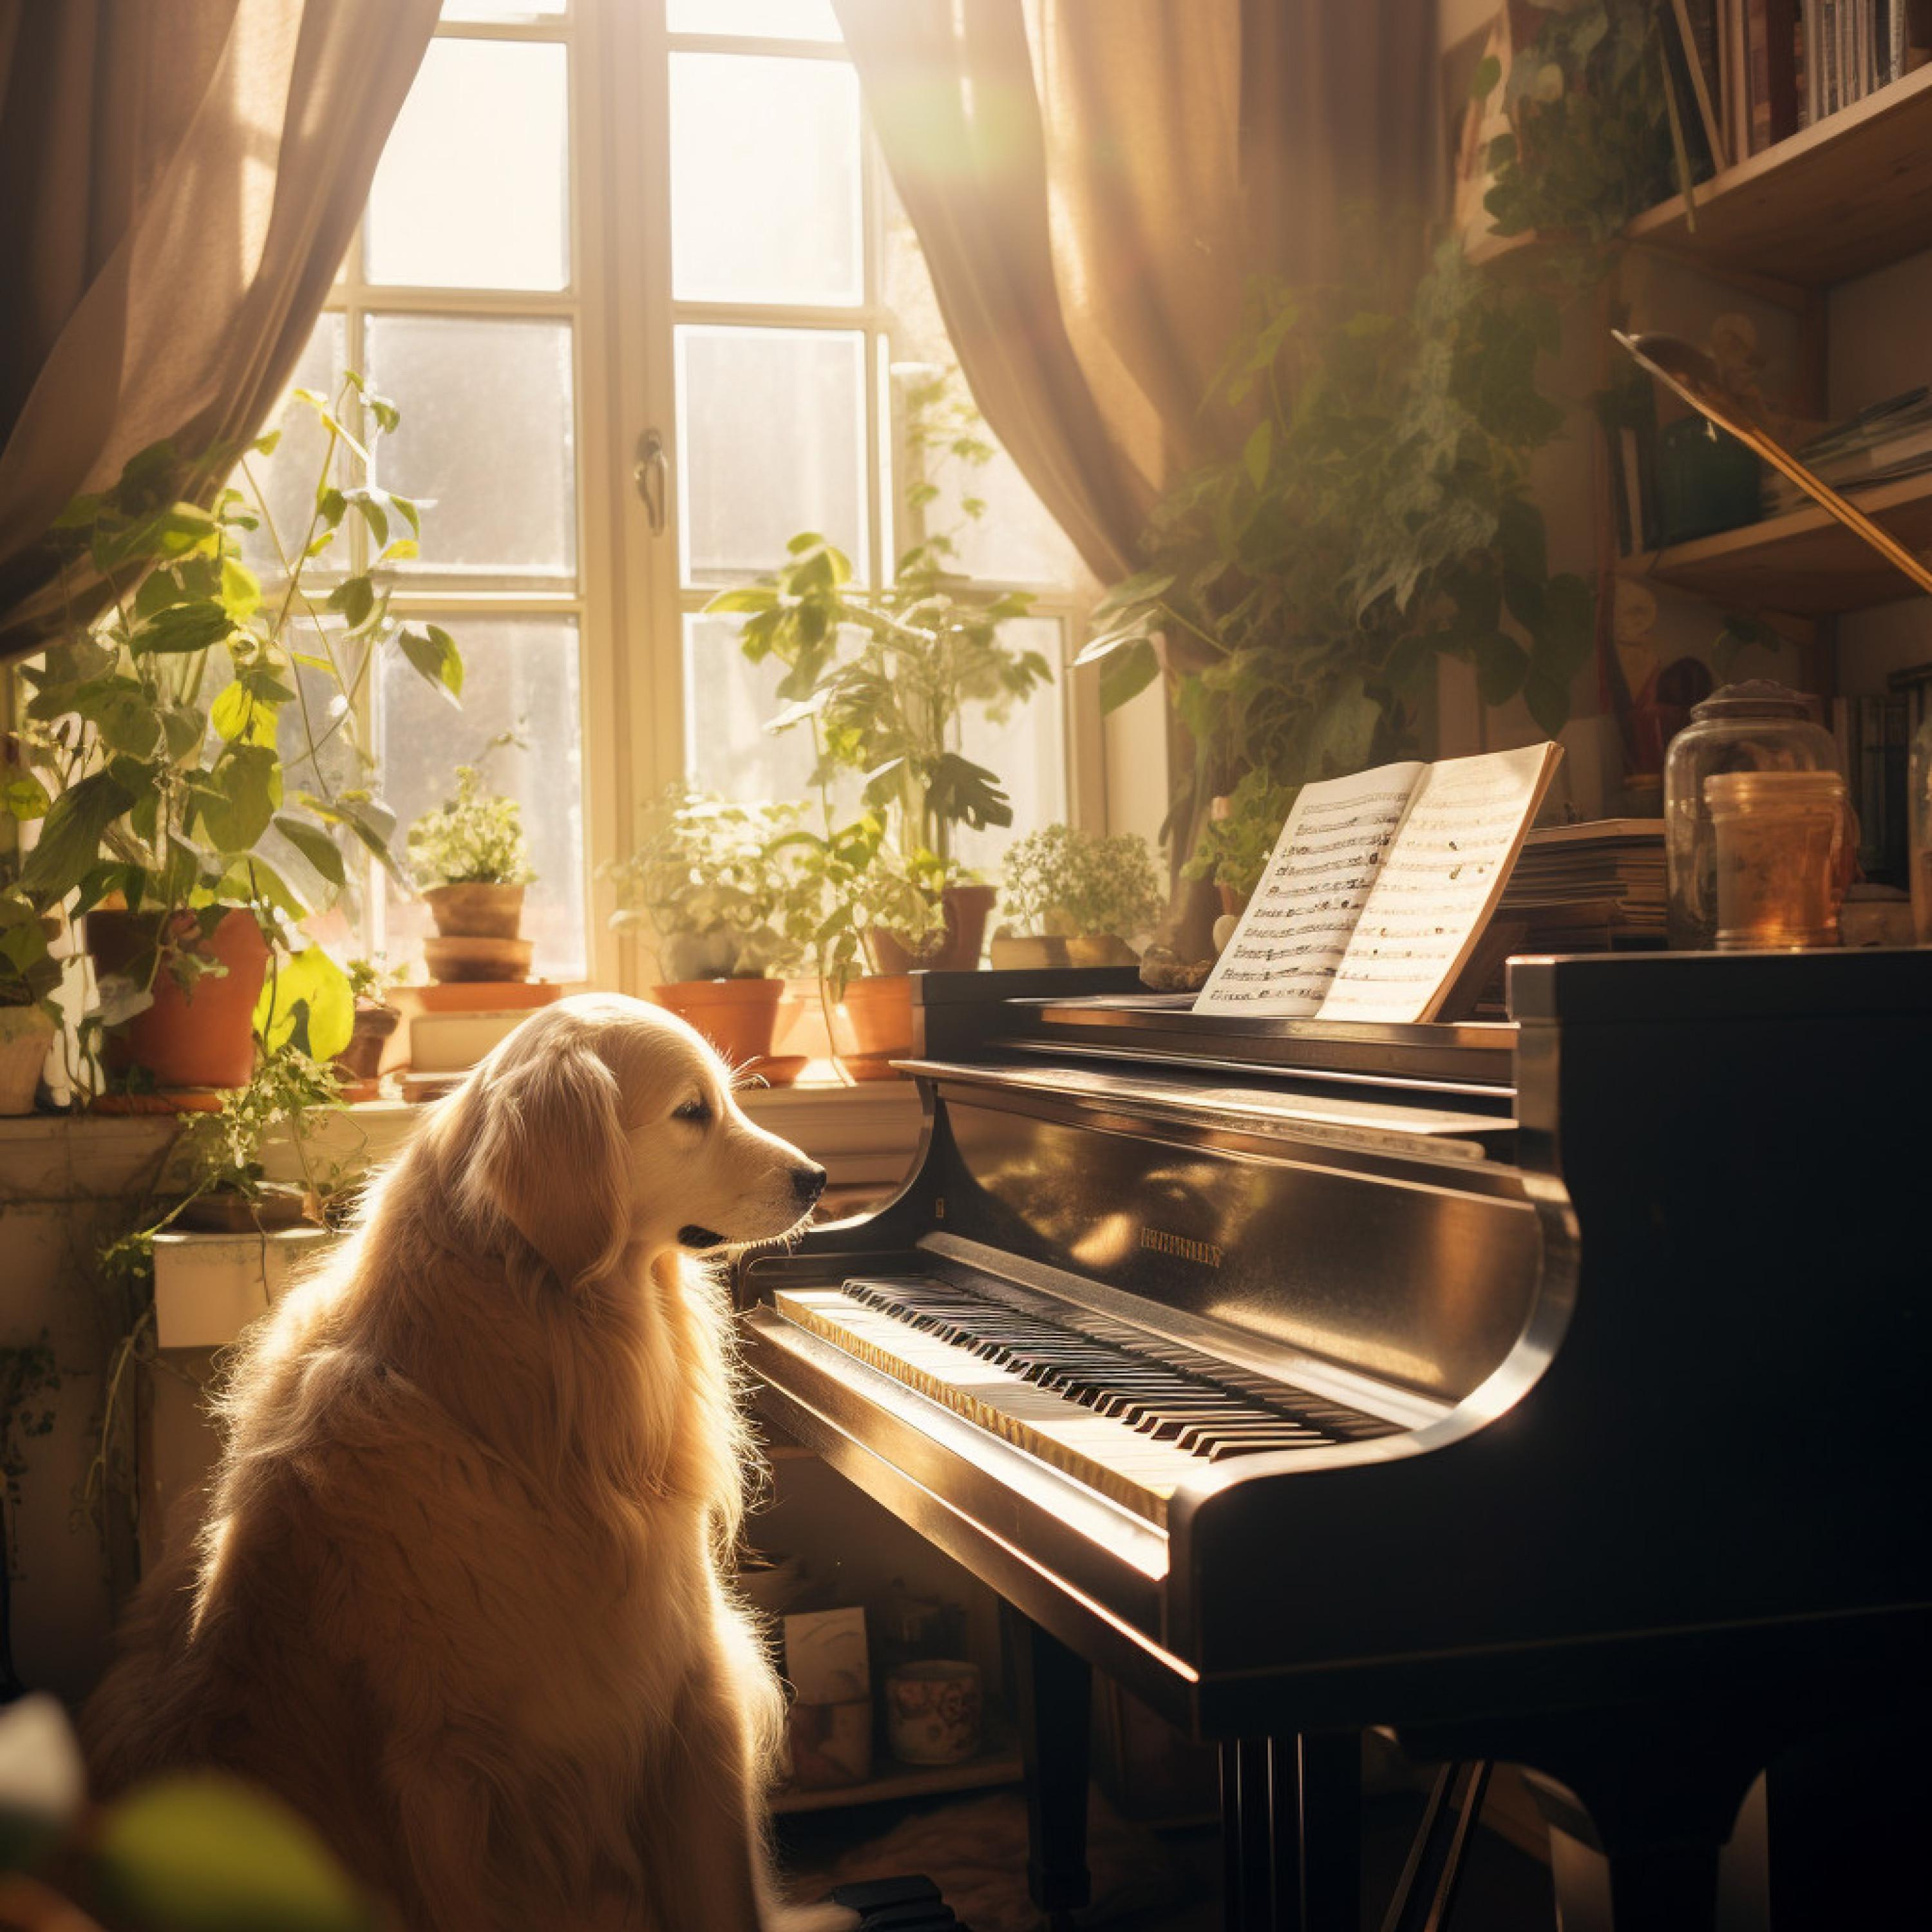 Pet Care Music Therapy - Soothing Sounds for Four-Legged Friends